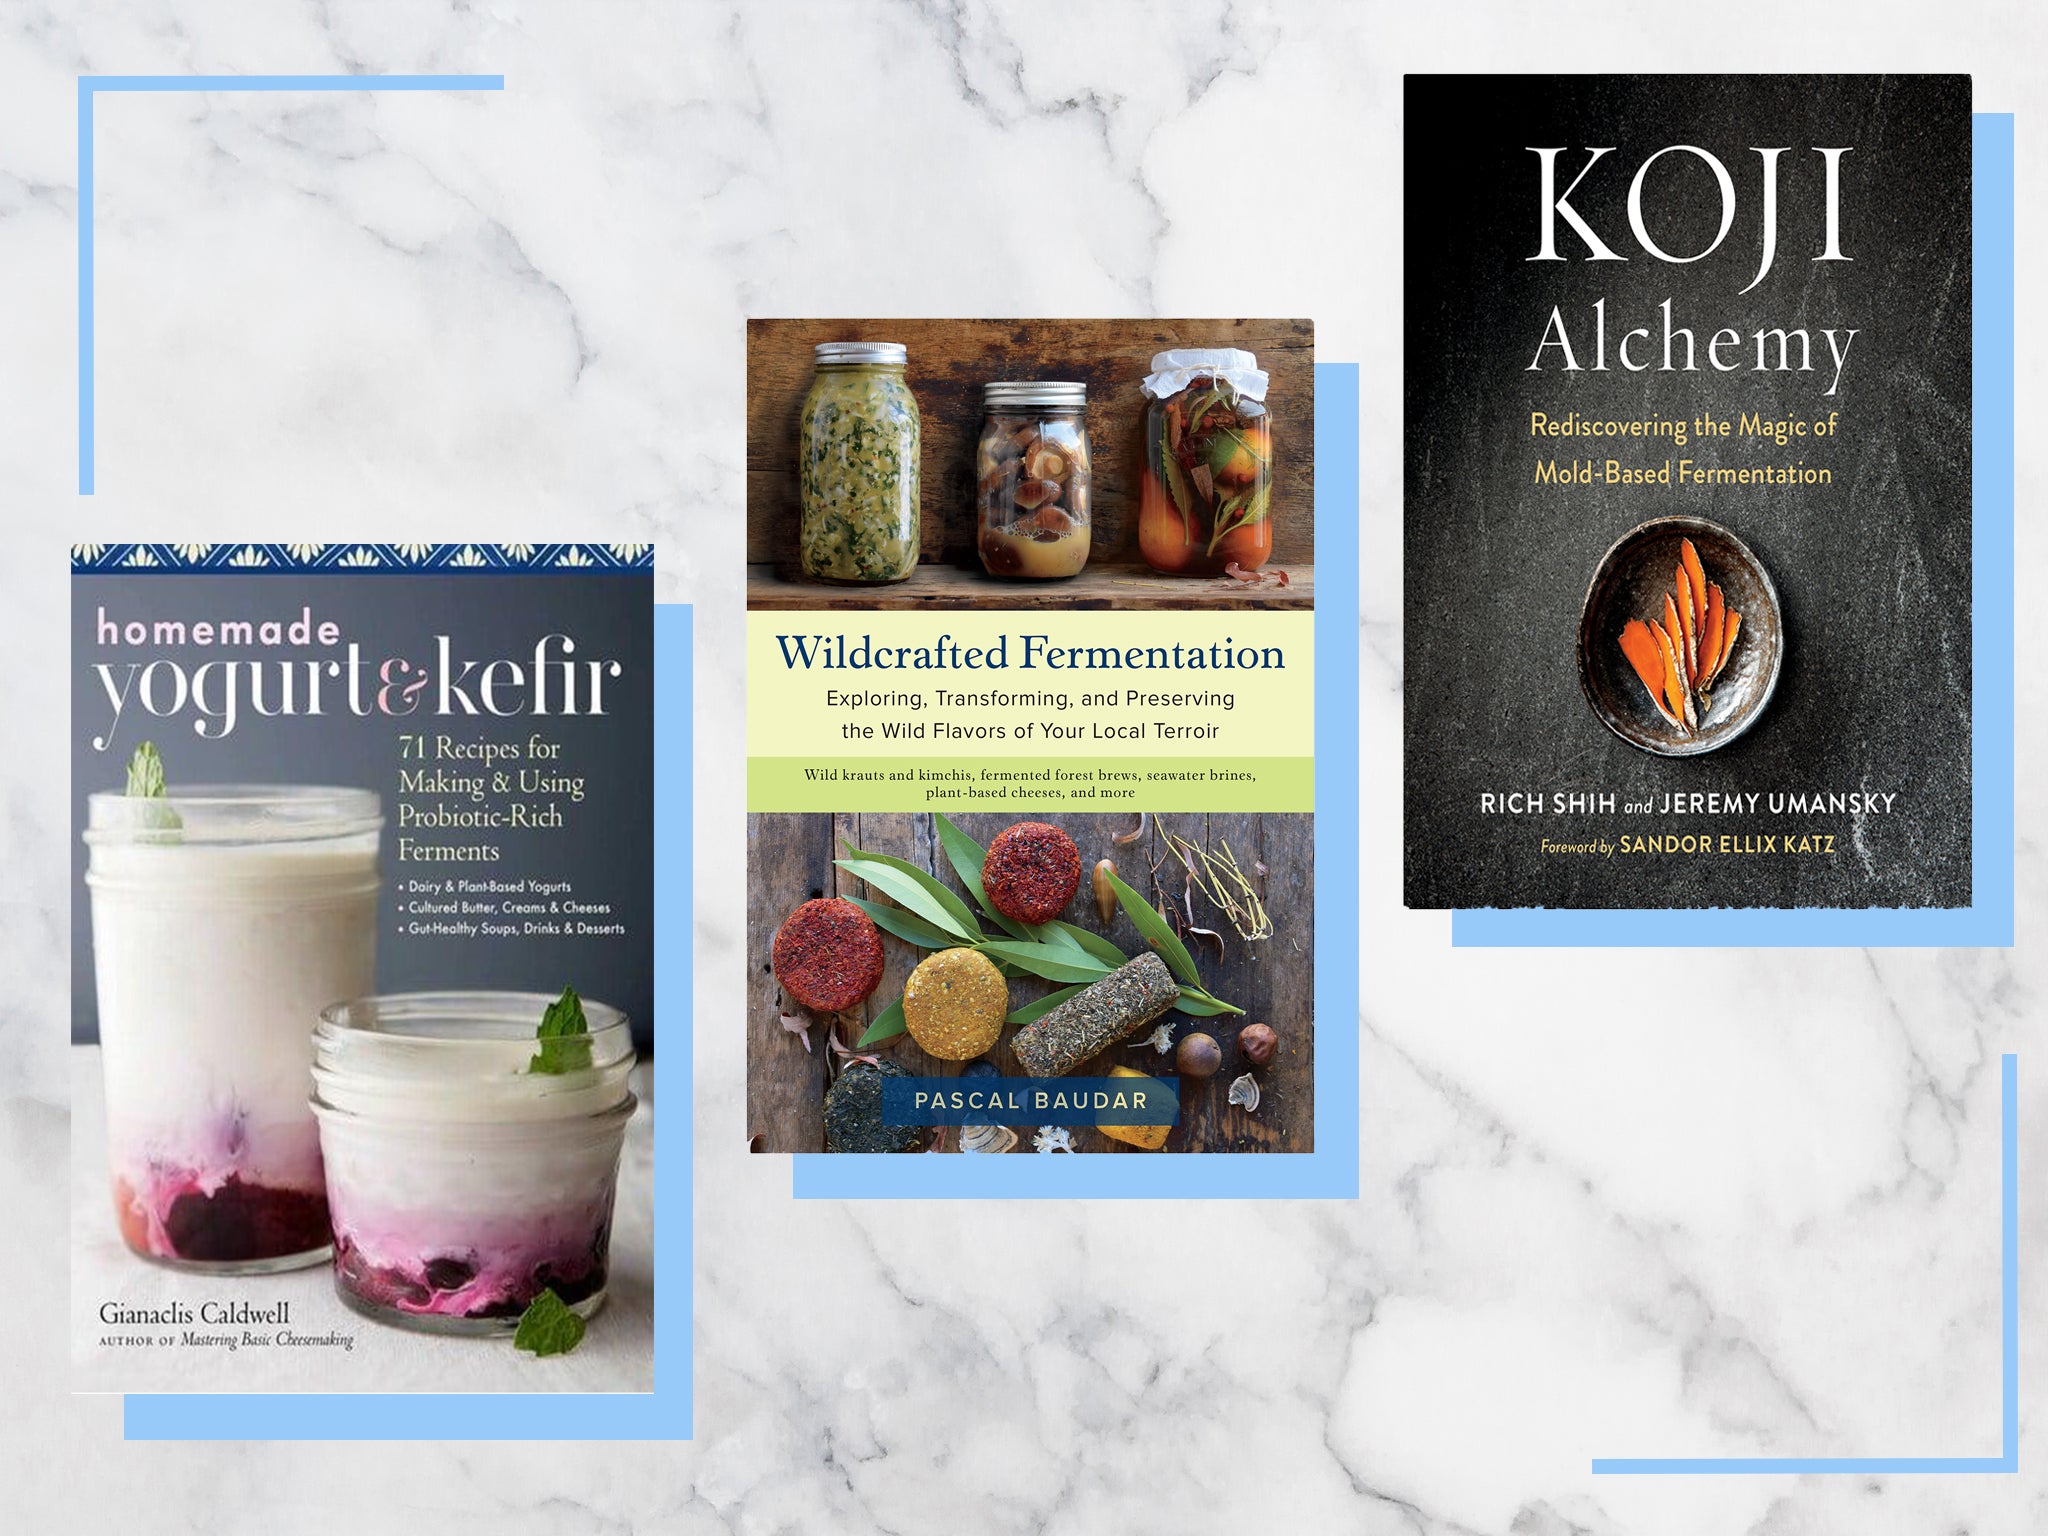 Some of these include an encyclopaedic amount of information on the art and chemistry of fermentation, while others are more straightforward, and full of recipes to be recreated at home